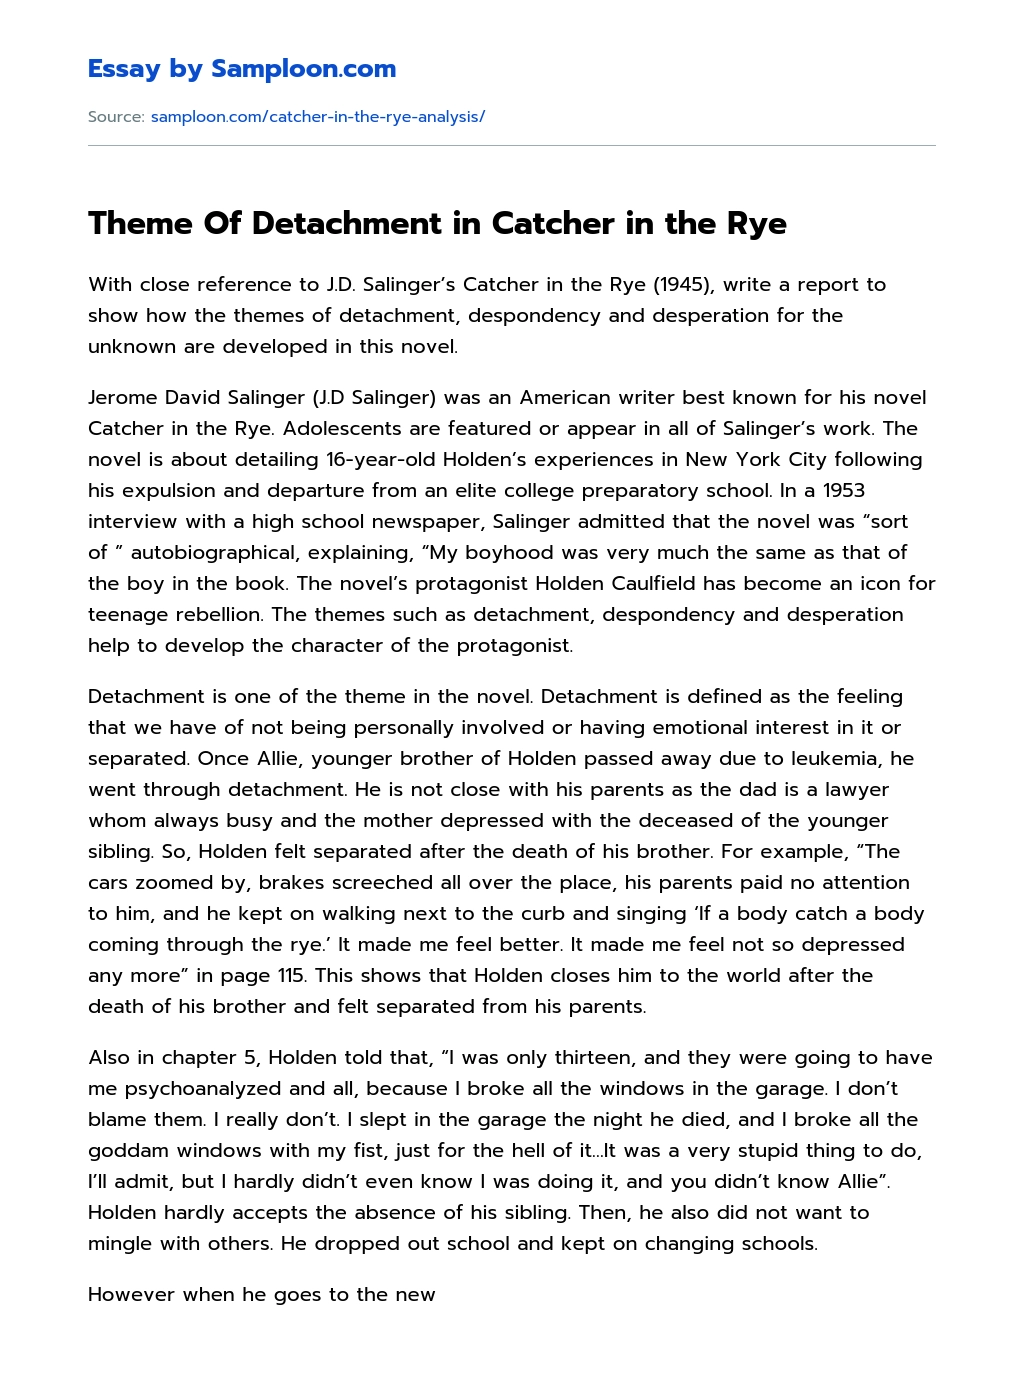 Theme Of Detachment in Catcher in the Rye Analytical Essay essay